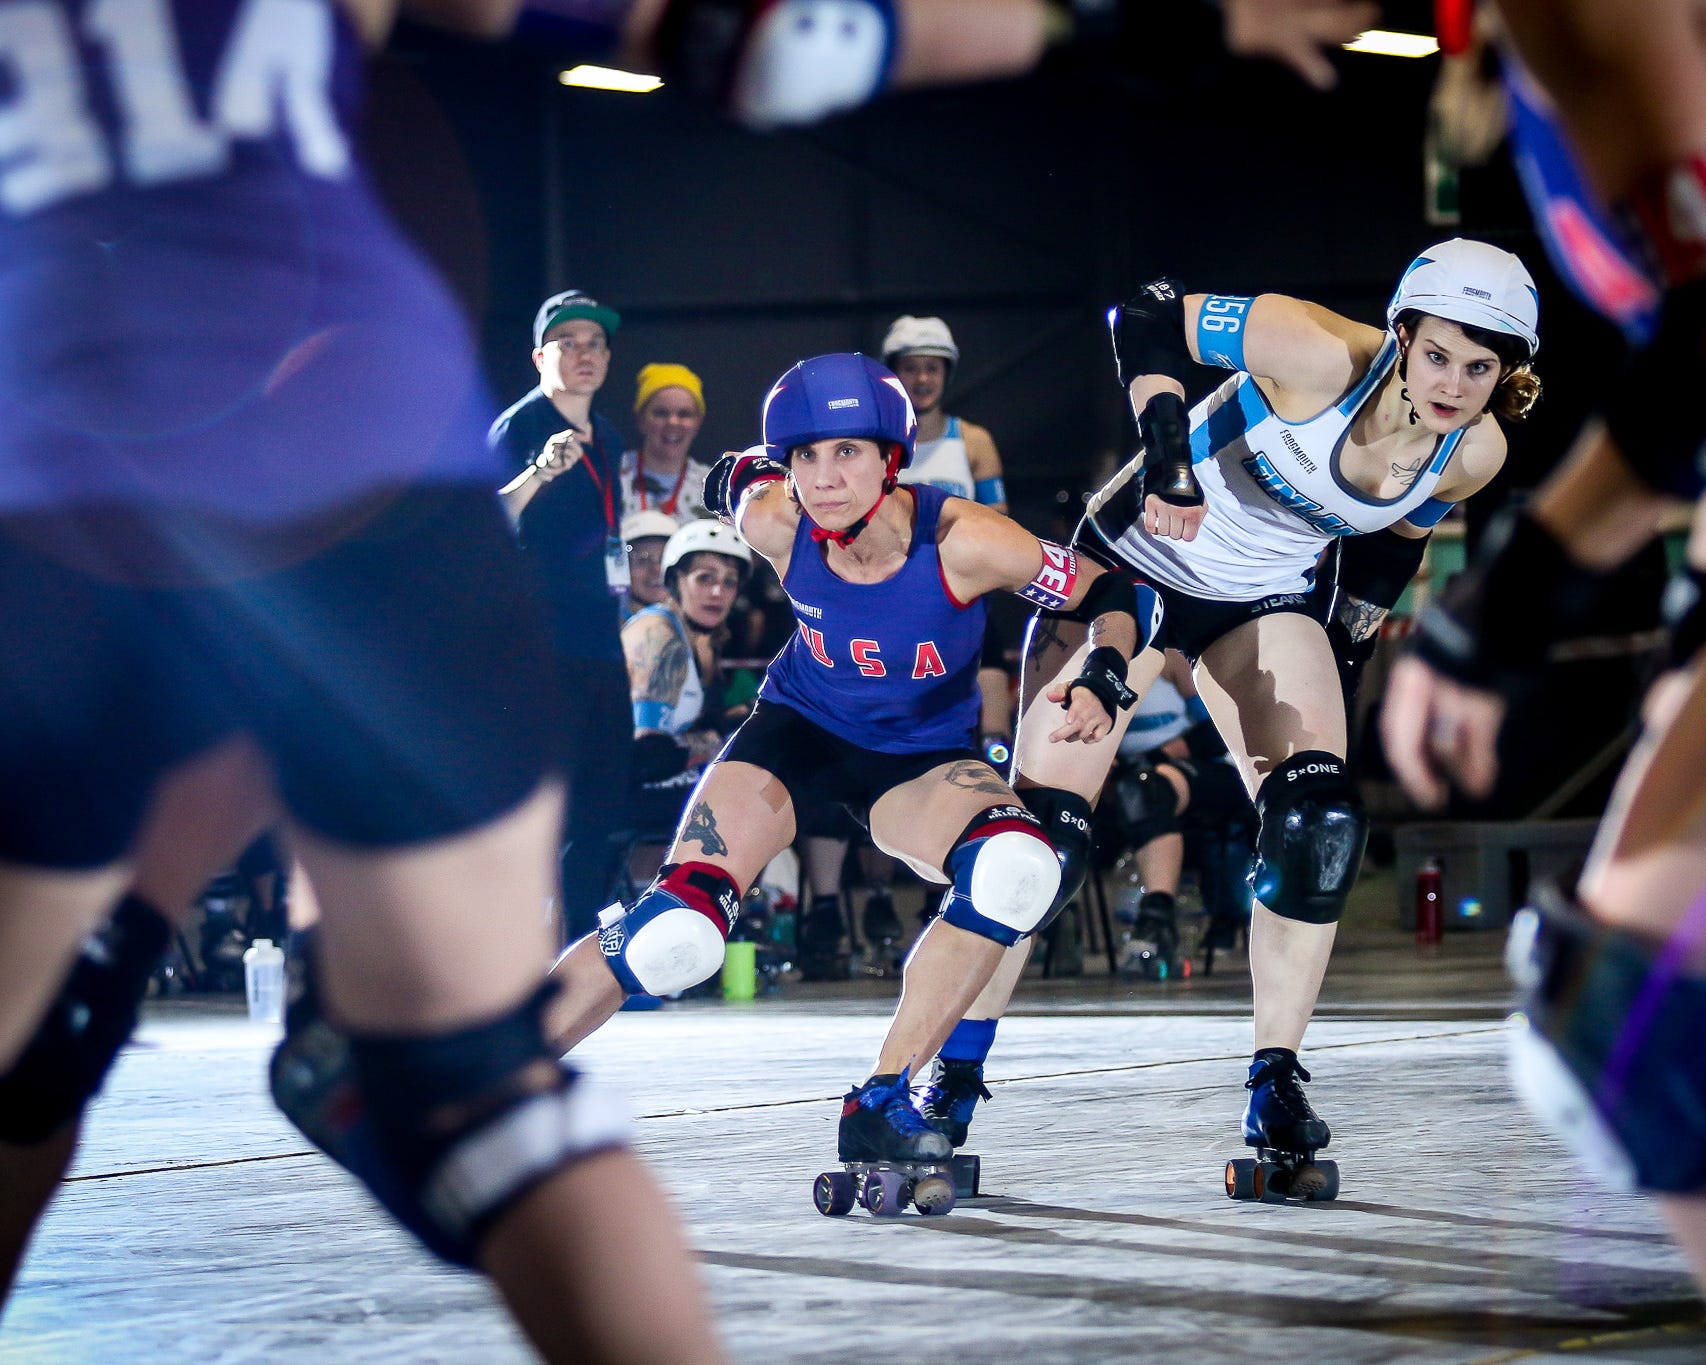 How to Watch Roller Derby. How to enjoy watching roller derby when